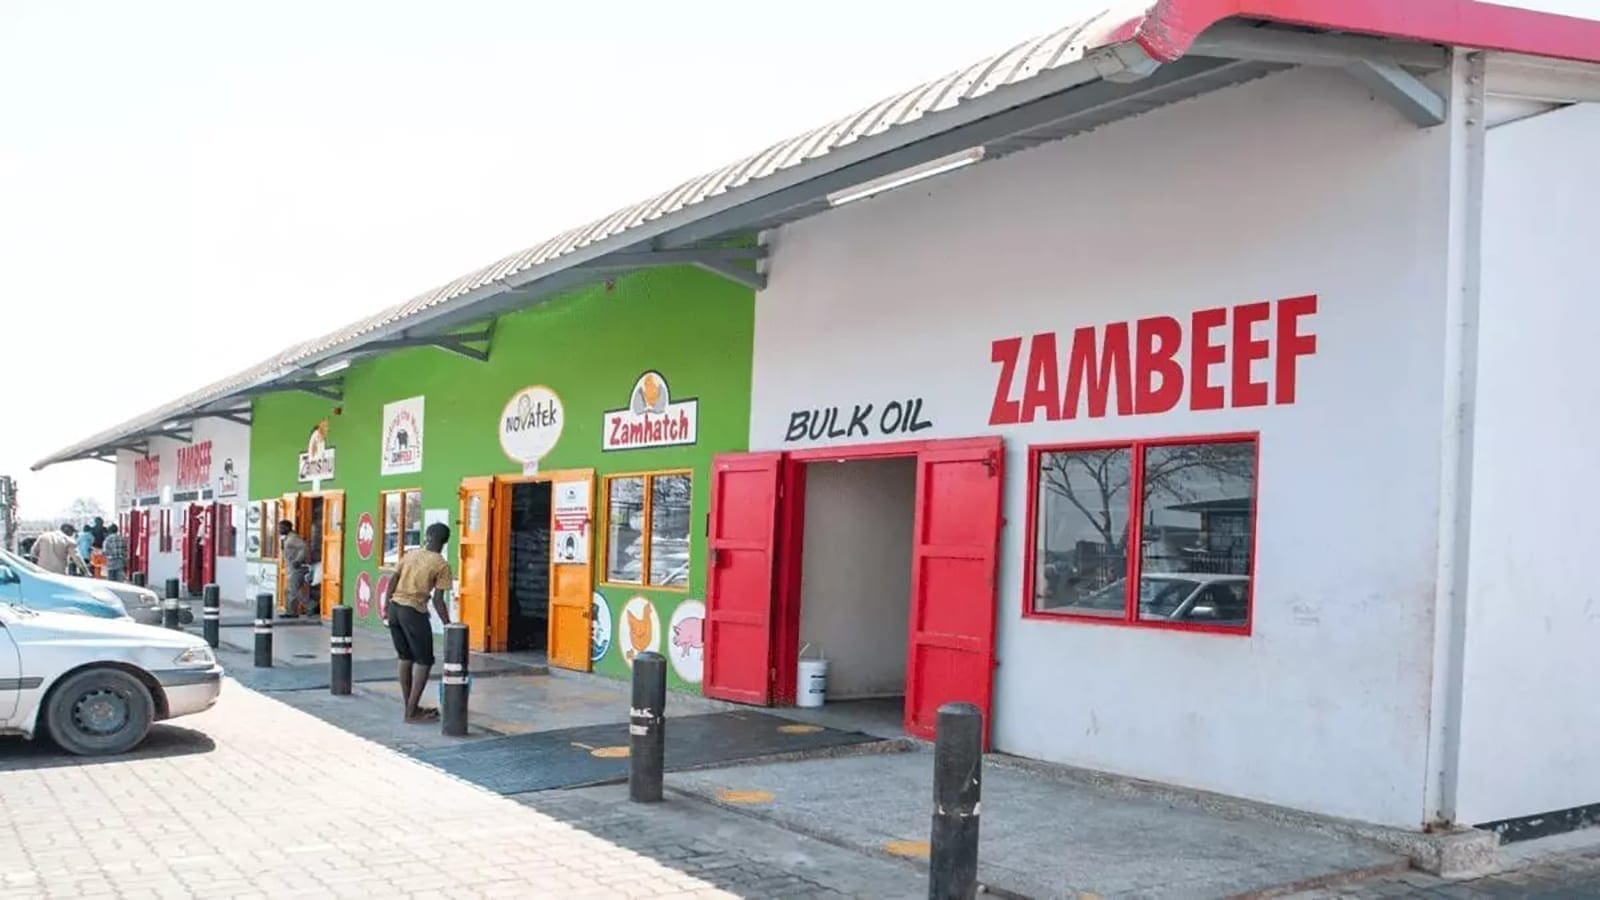 Zambeef Products registers impressive bottom-line performance driven by poultry, retail division